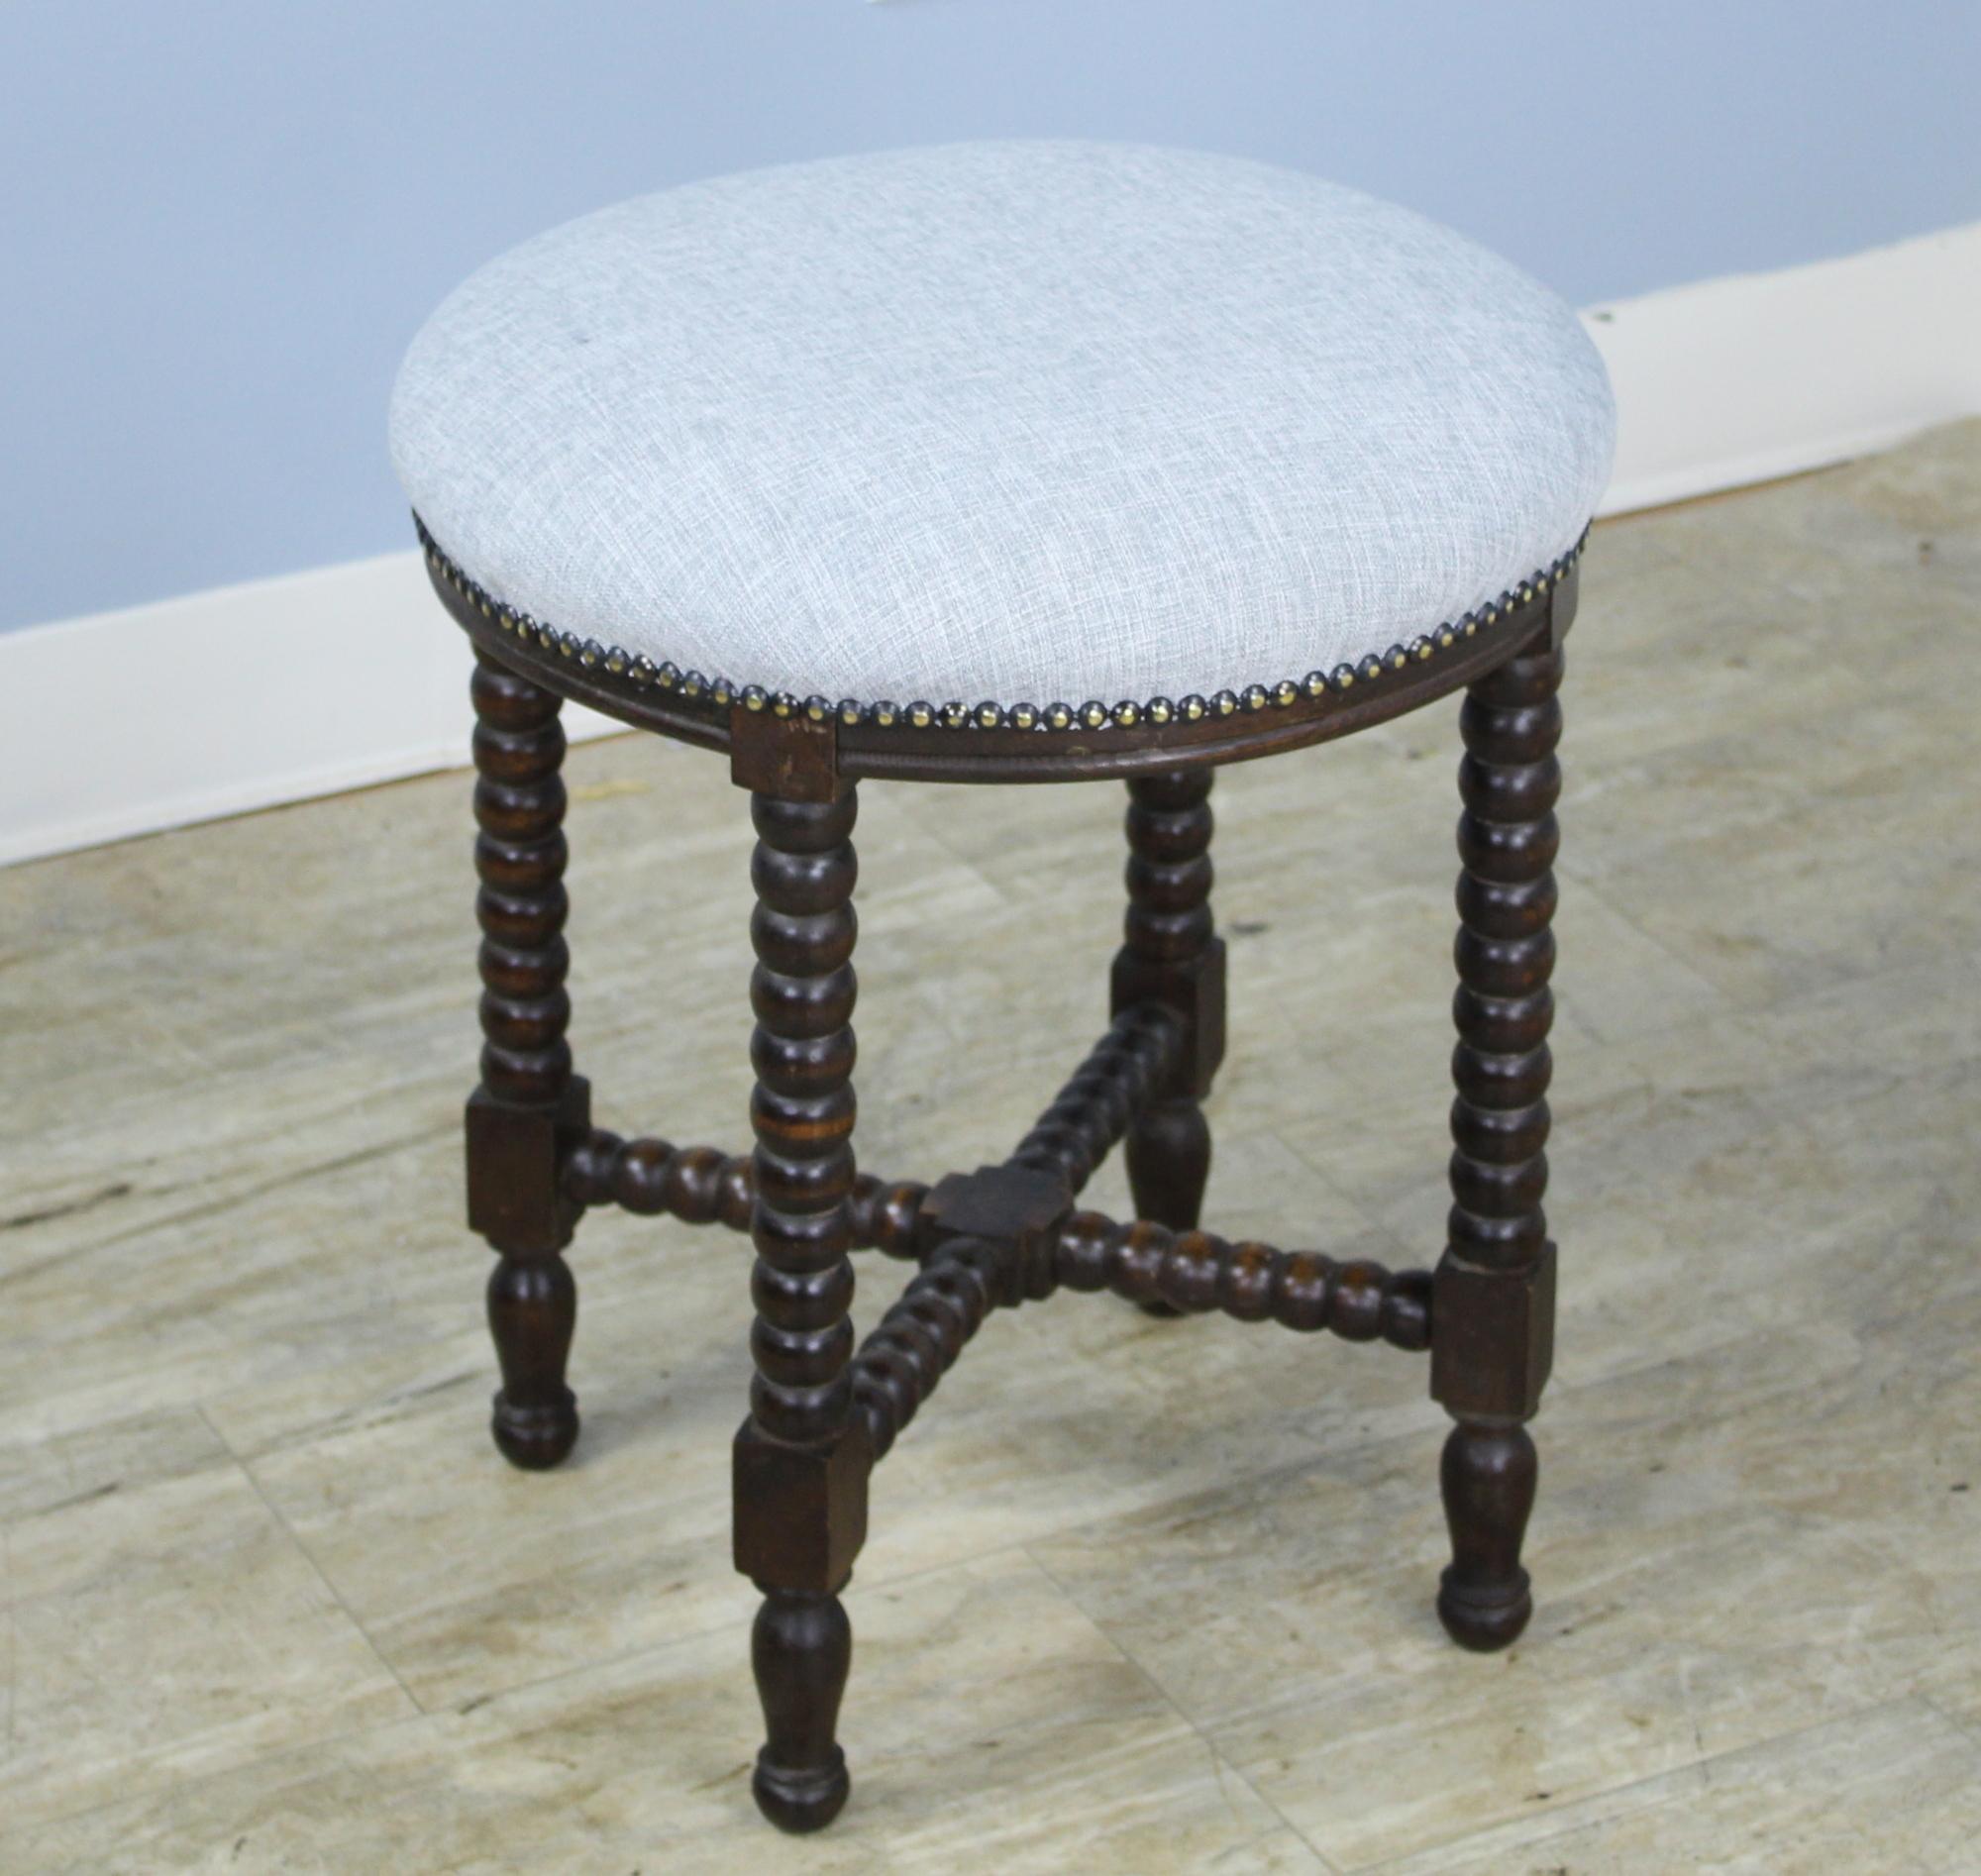 An eye-catching bobbin legged stool, newly upholstered in gray linen. Nice comfortable height provides good extra seating in any room. If you need more than one, take a look at our oval stool, similarly upholstered.